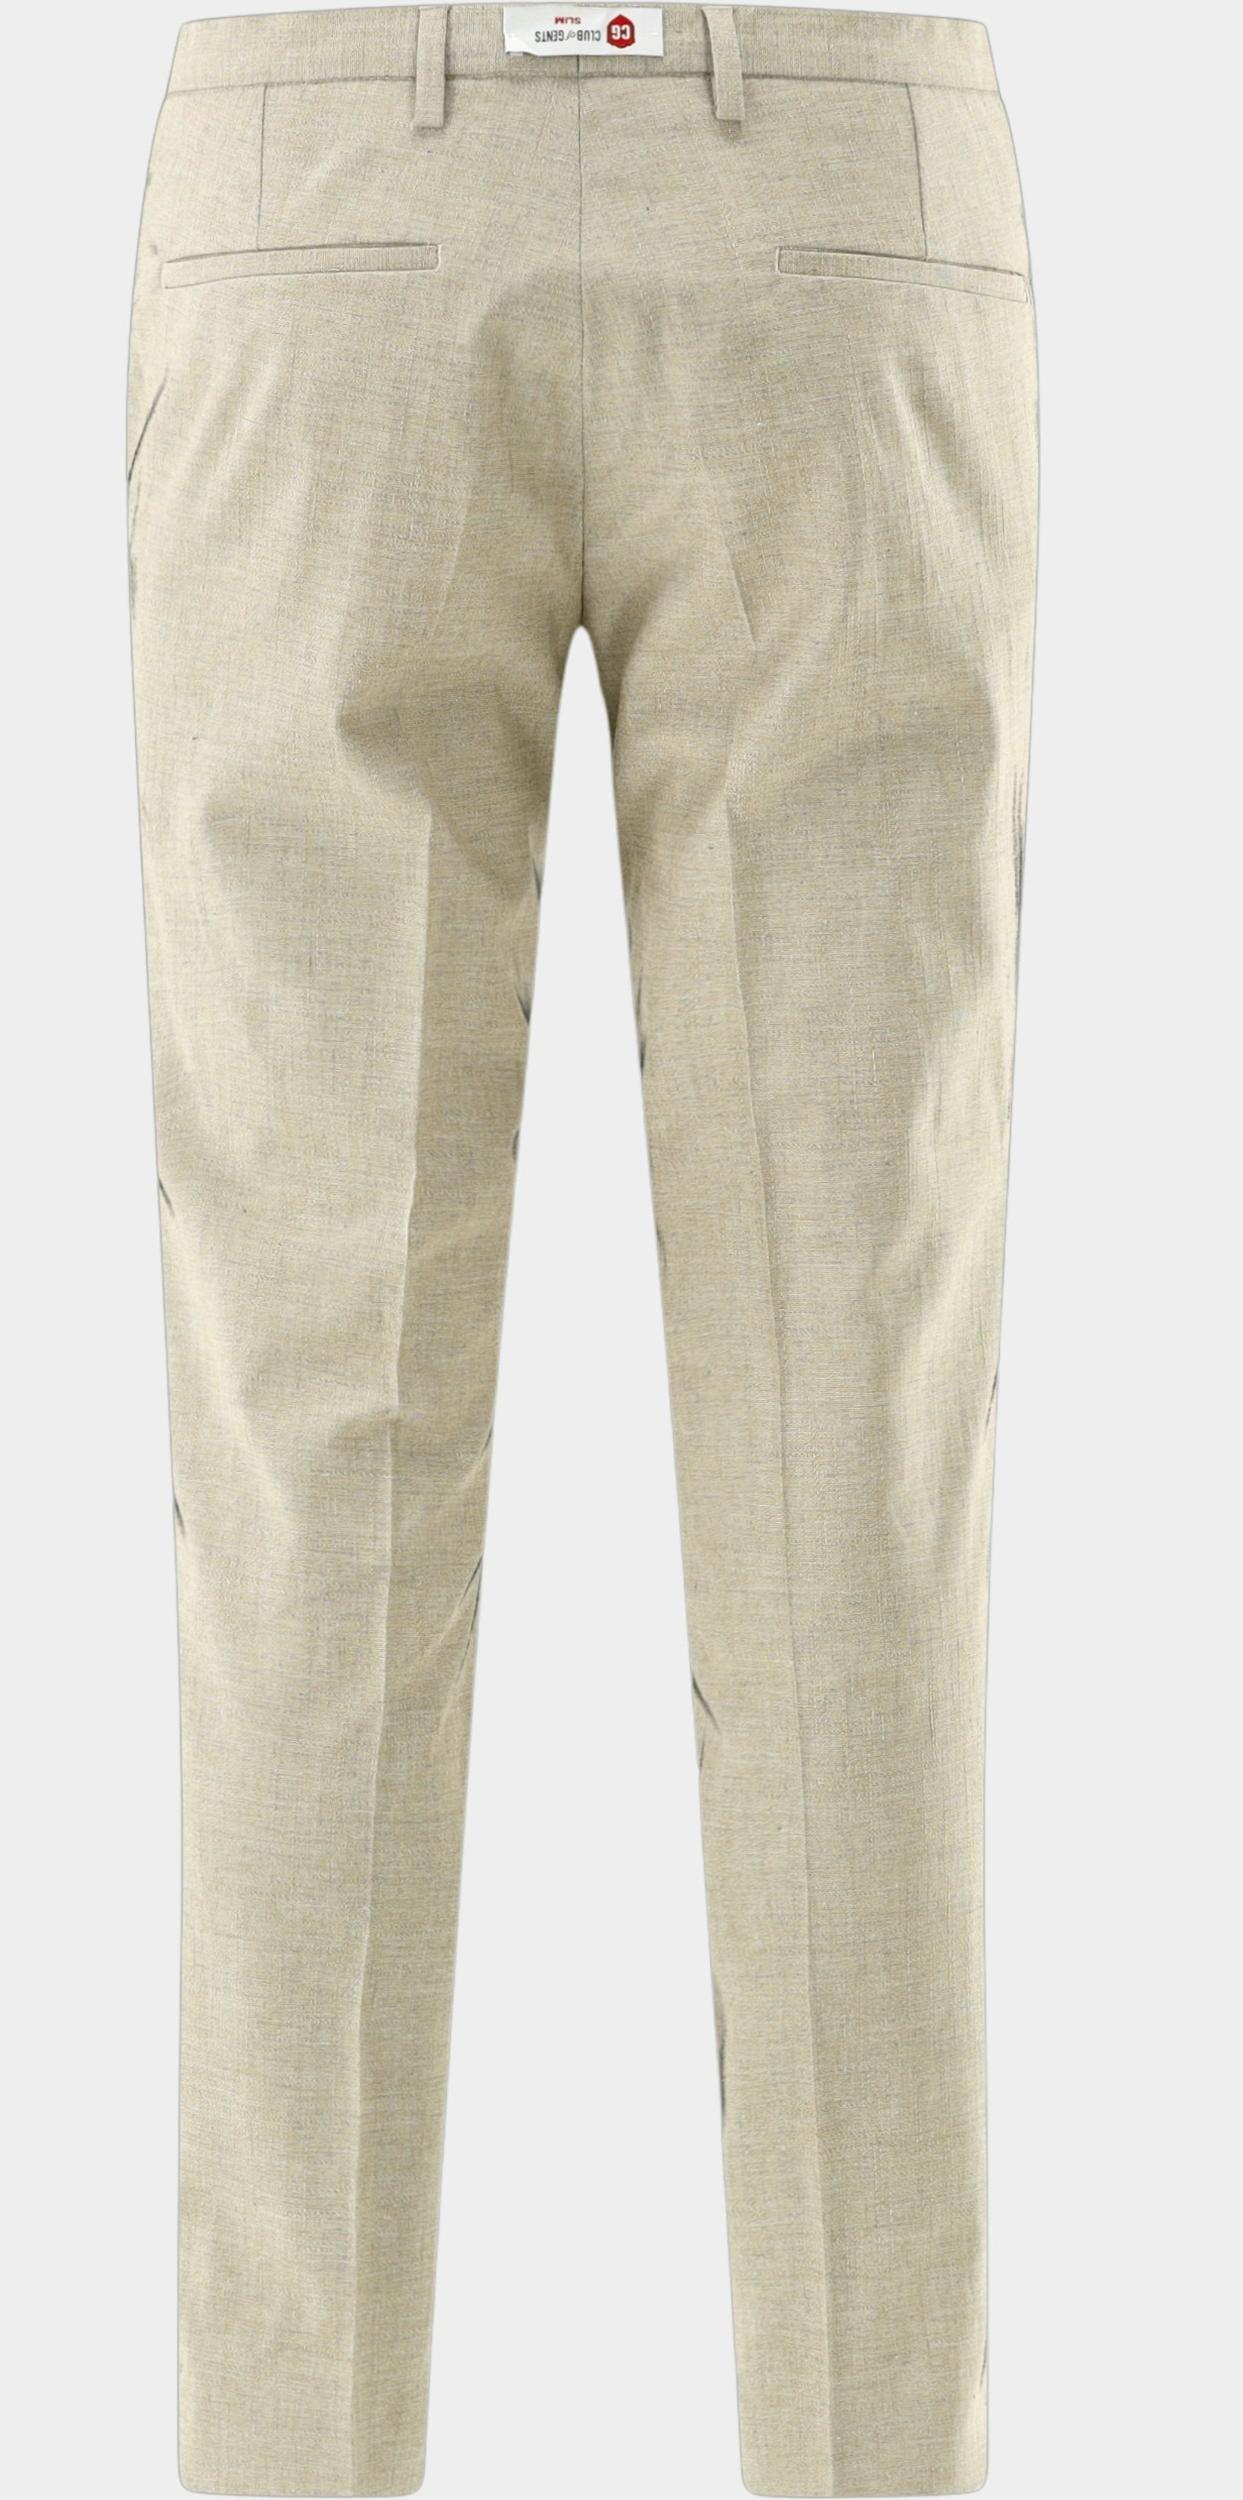 Your own Party By CG - Cl Pantalon Mix & Match Beige Hose/Trousers CG Paco-N 20.170S0 / 431113/22